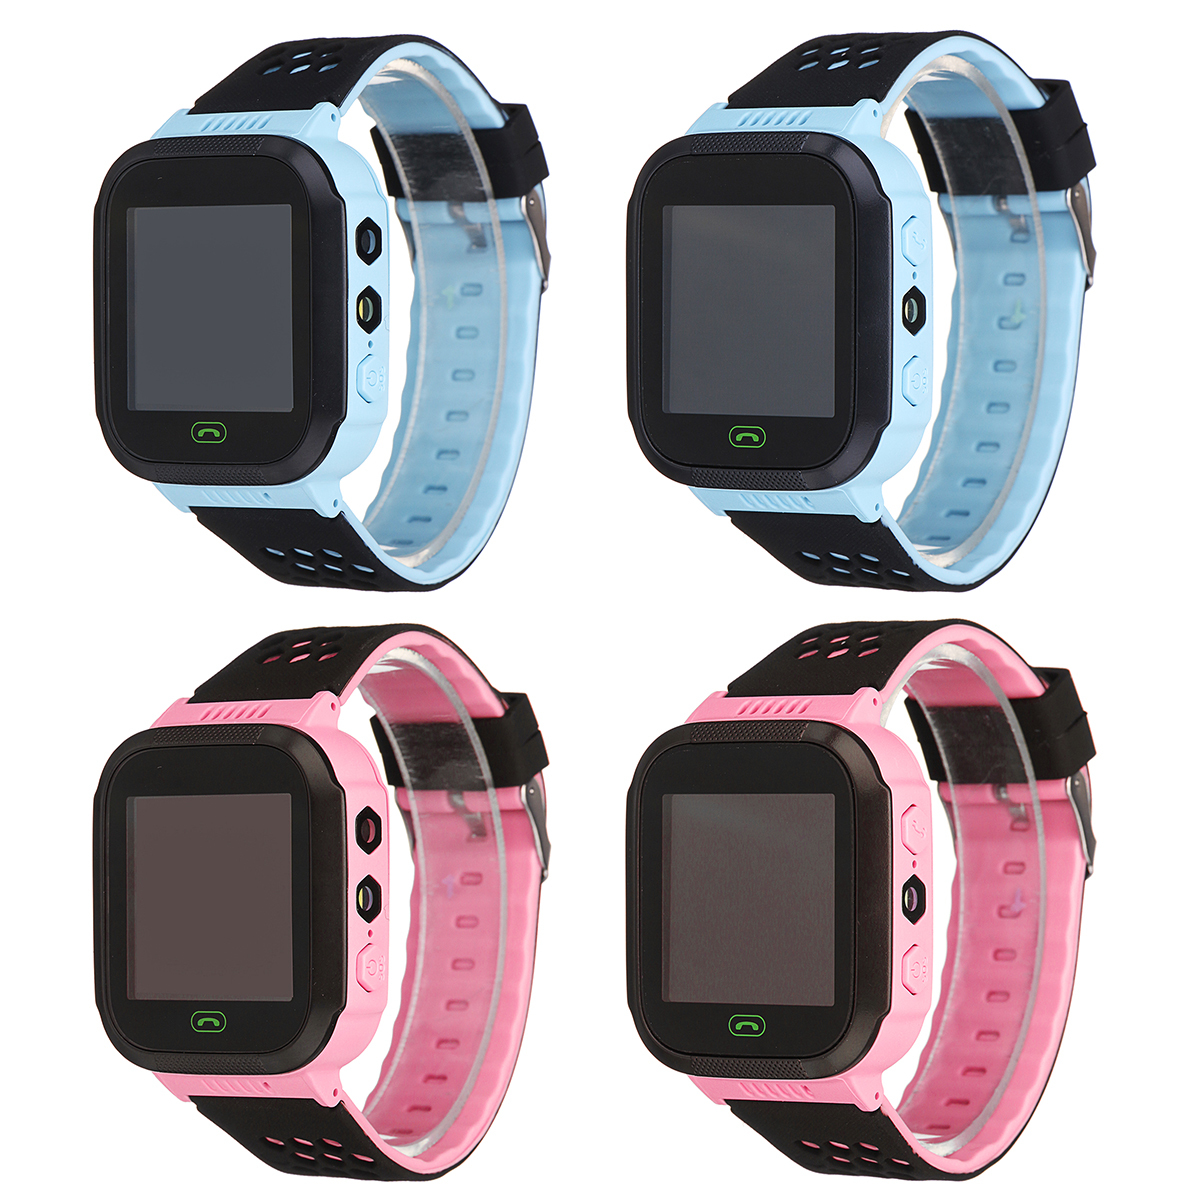 Bakeey Waterproof Tracker SOS Call Children Smart Watch For Android IOS 2